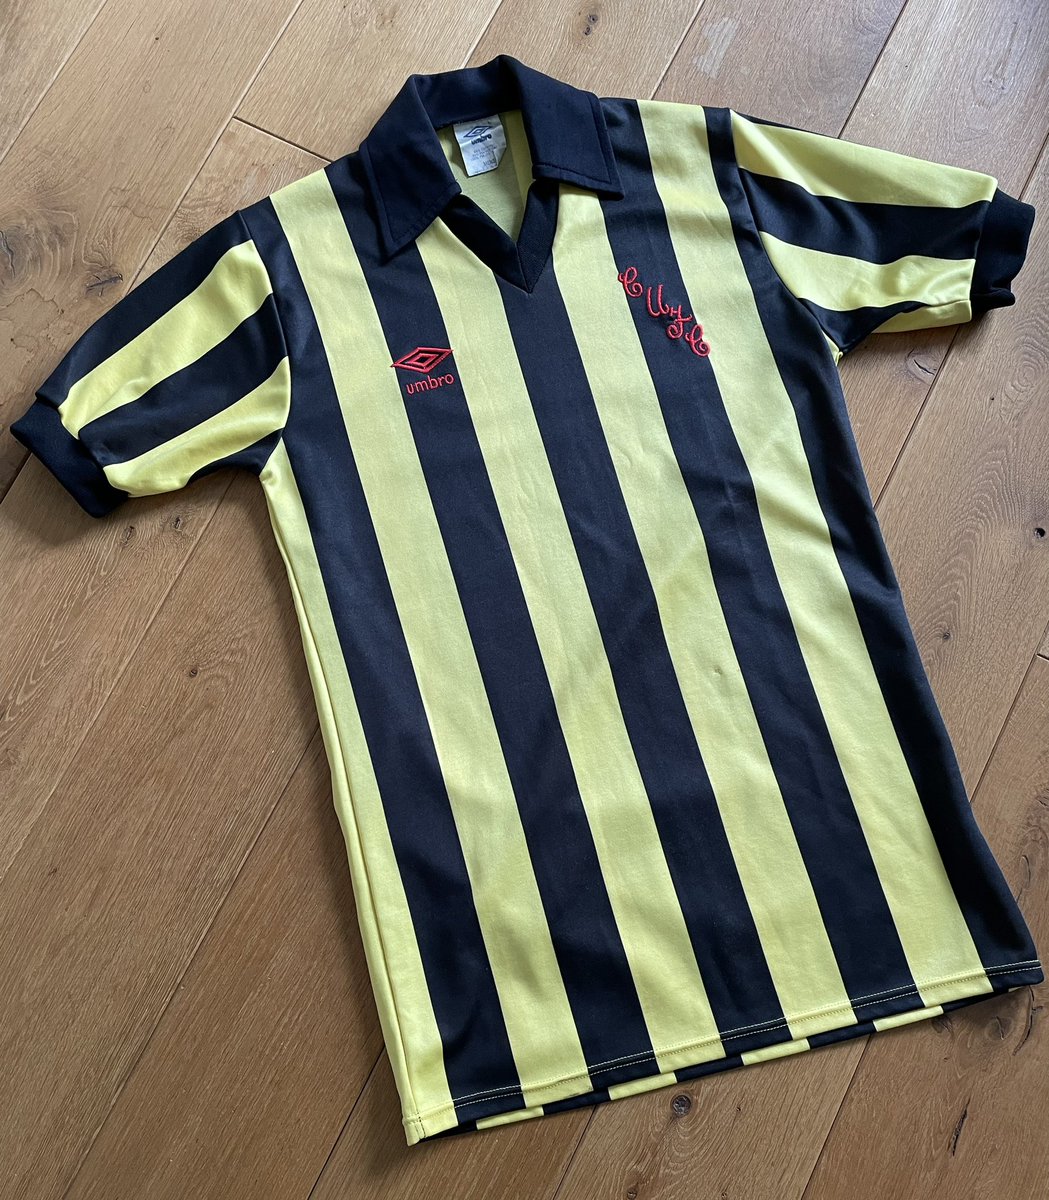 Cambridge United Home shirt Nov 85-86. Despite starting the season with Mileta, various supply issues resulted in a hasty mid-season switch to Umbro. #cambridgeunited #cufc #umbro #camutd #80s